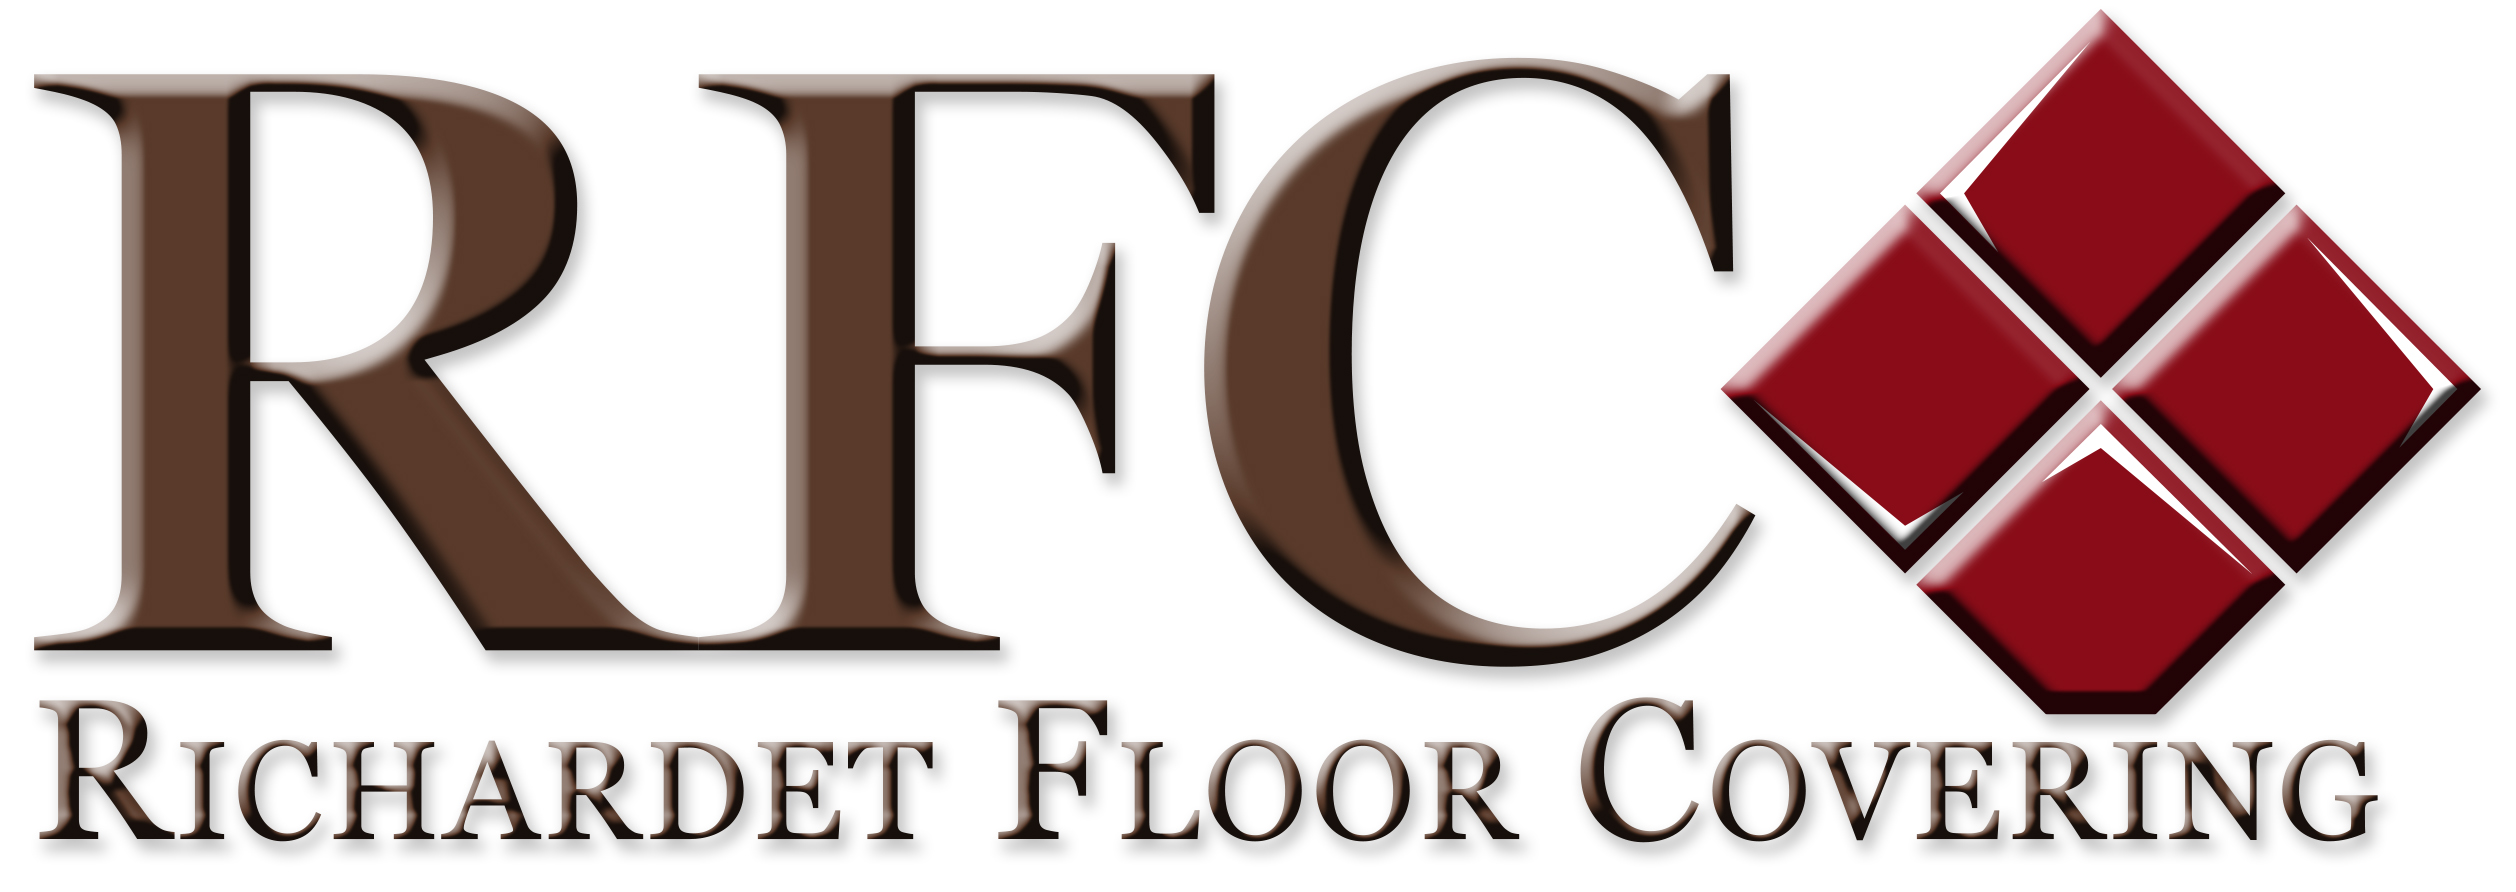 Richardet Floor Covering – Perryville, MO